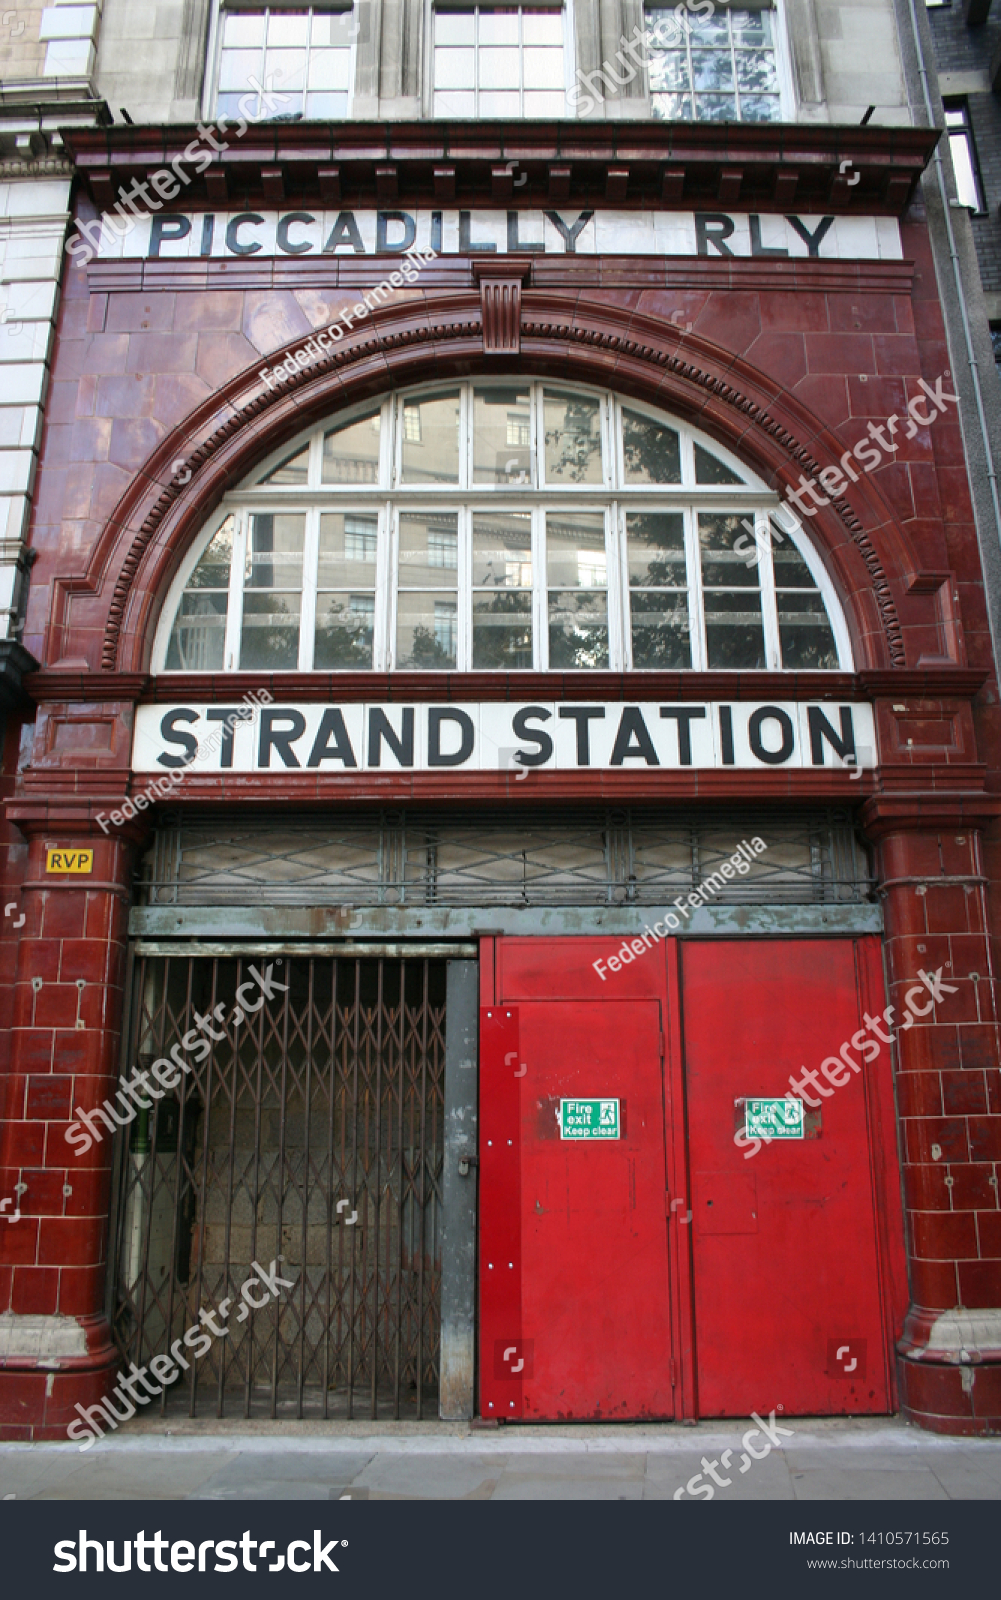 26 Aldwych tube station Images, Stock Photos & Vectors | Shutterstock